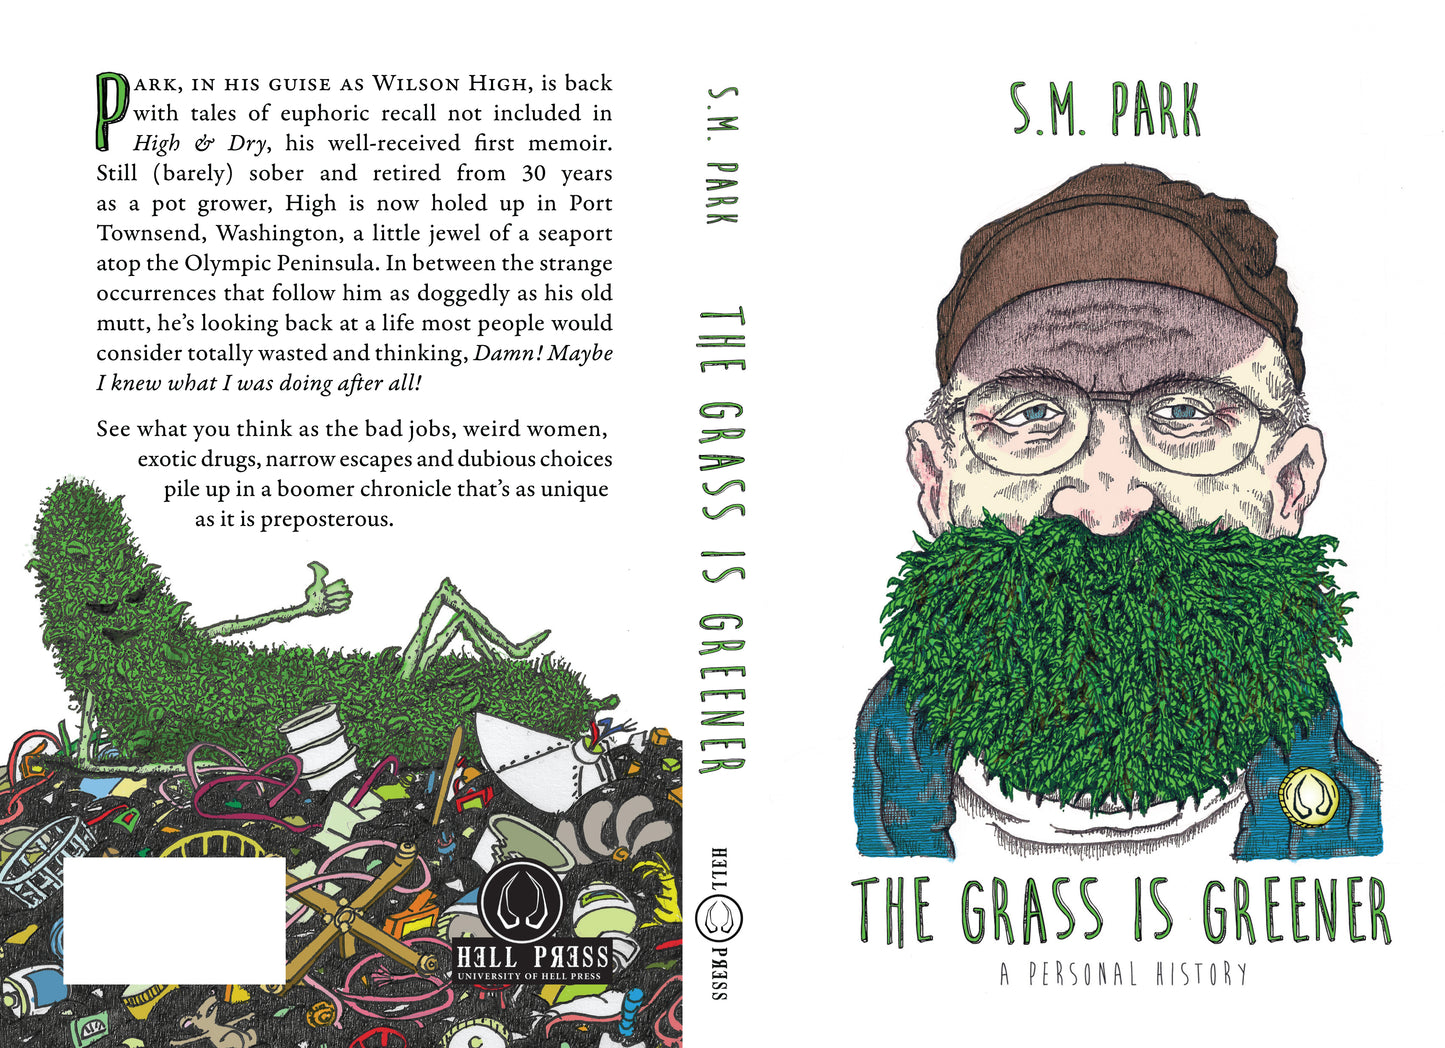 The Grass Is Greener by Stephen M. Park